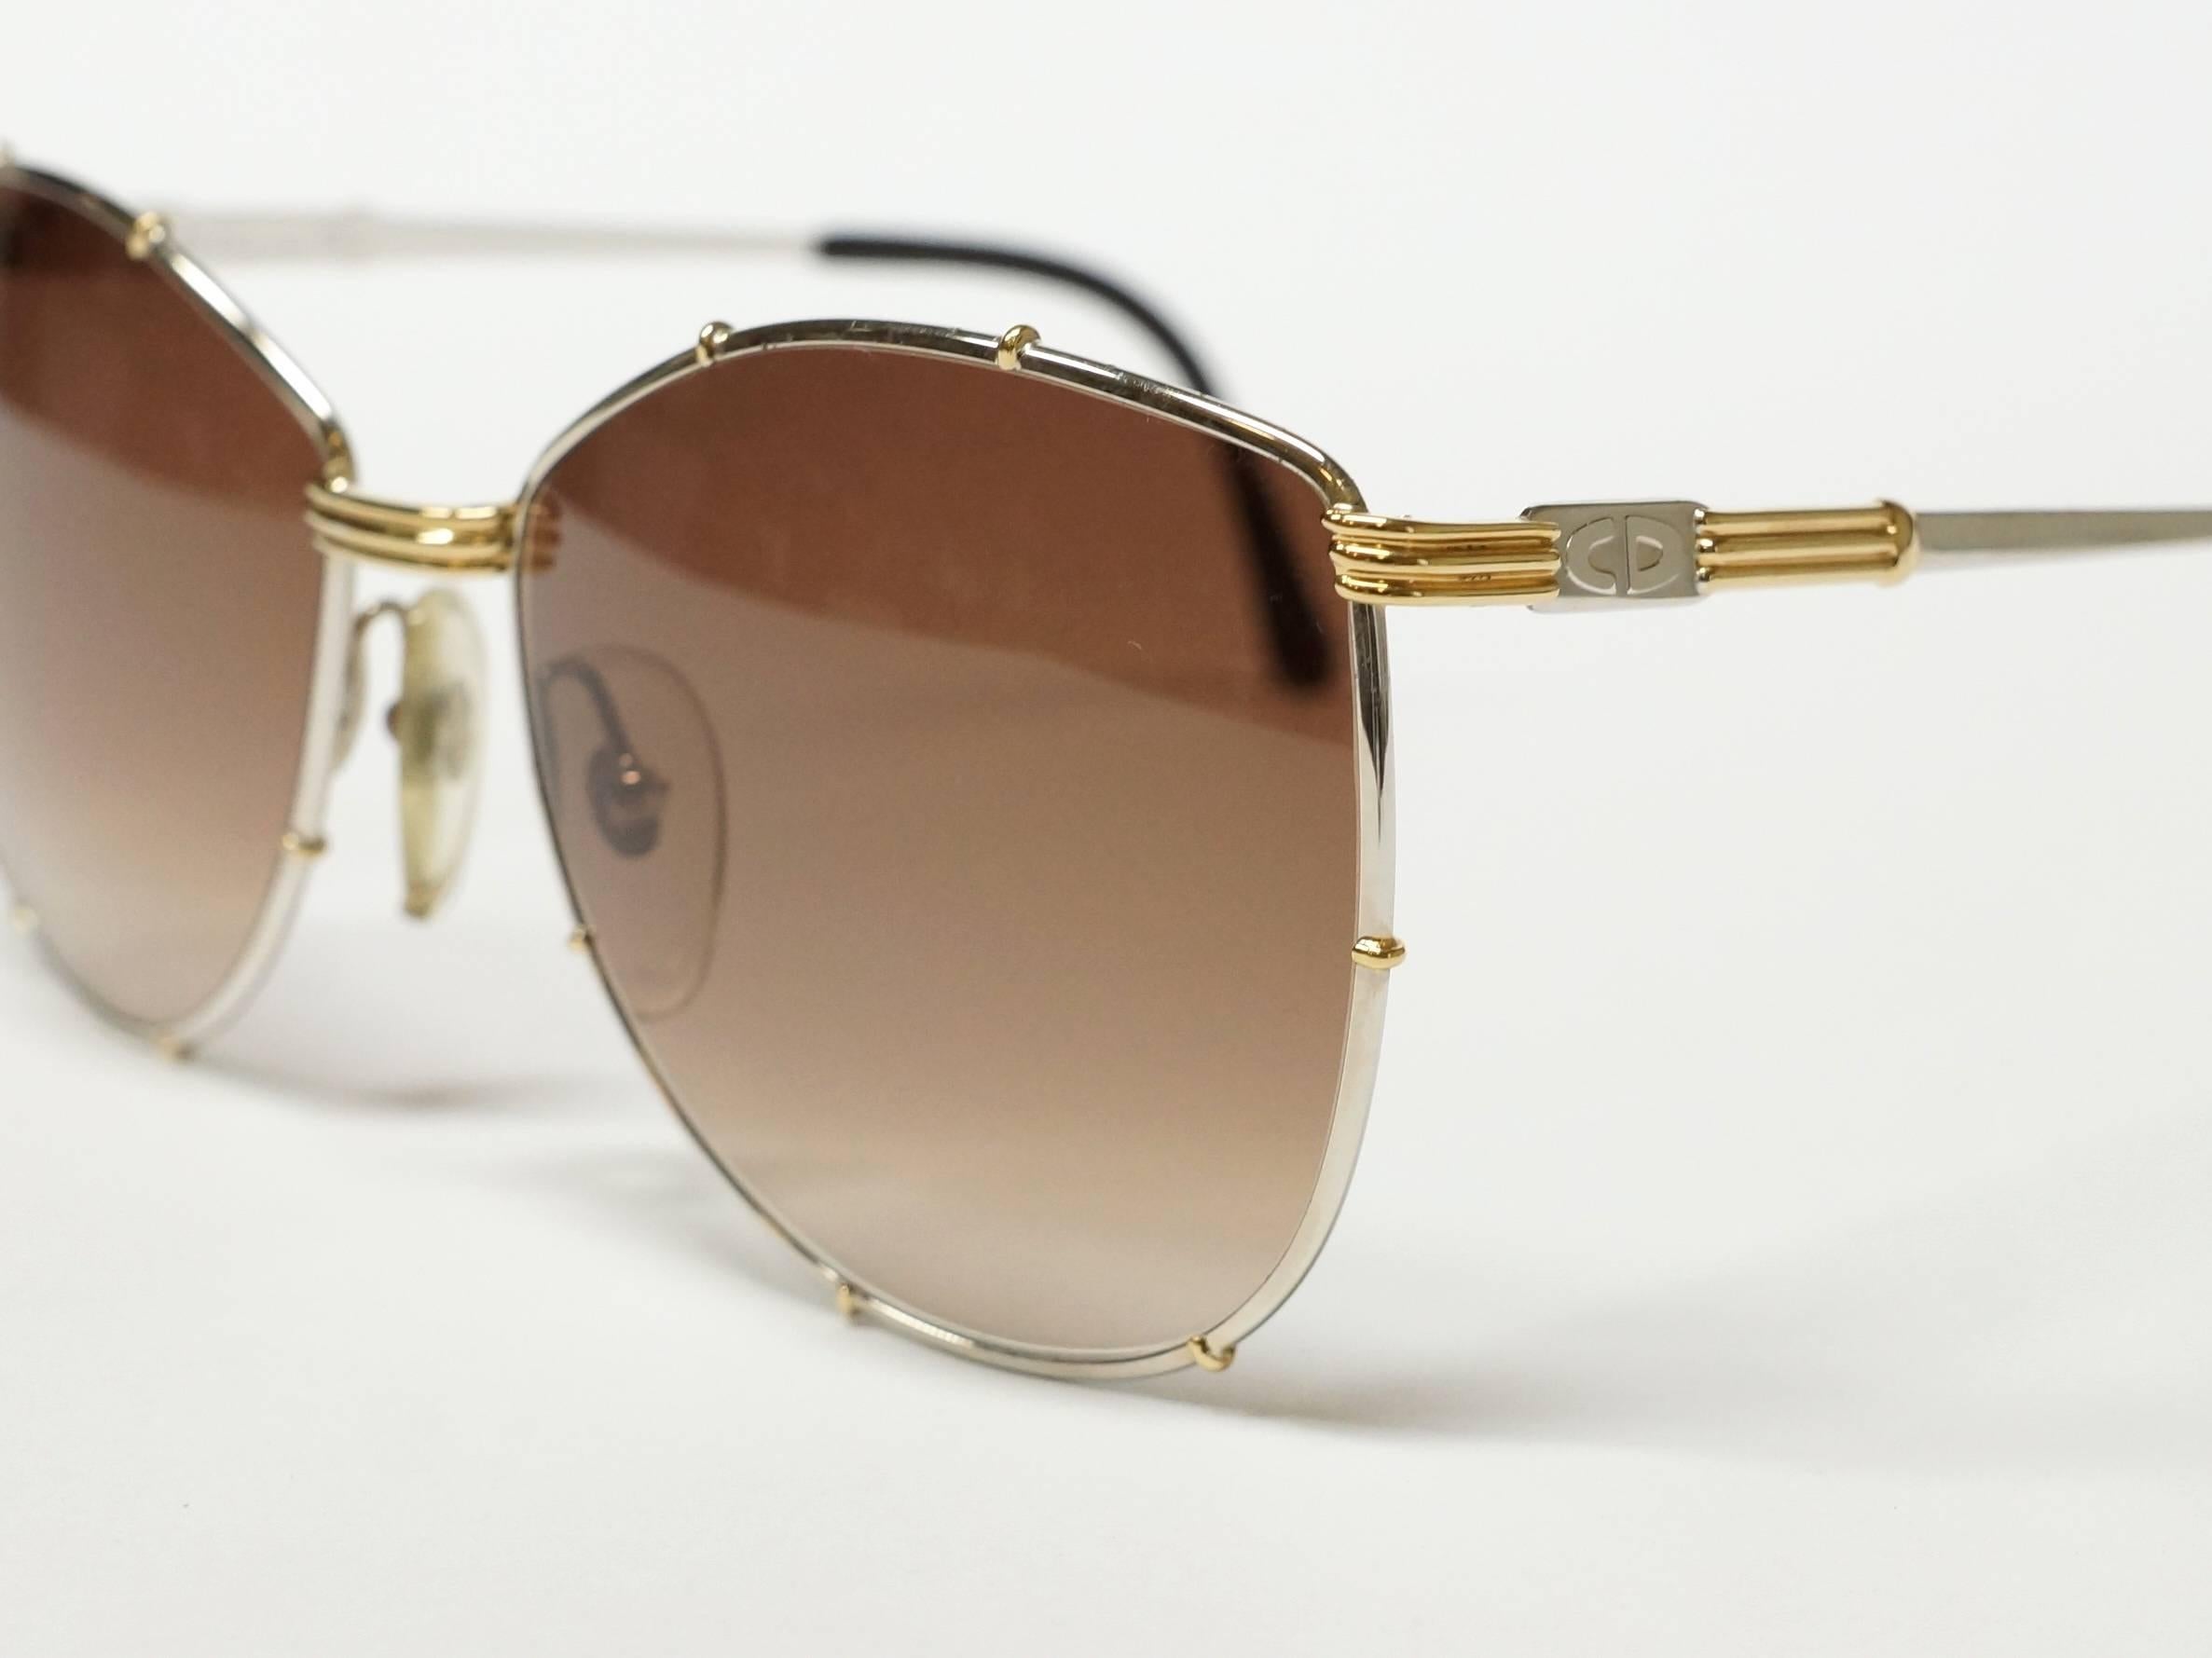 Vintage Christian Dior Bicolor Metal Sunglasses in New Old Stock Condition For Sale 3